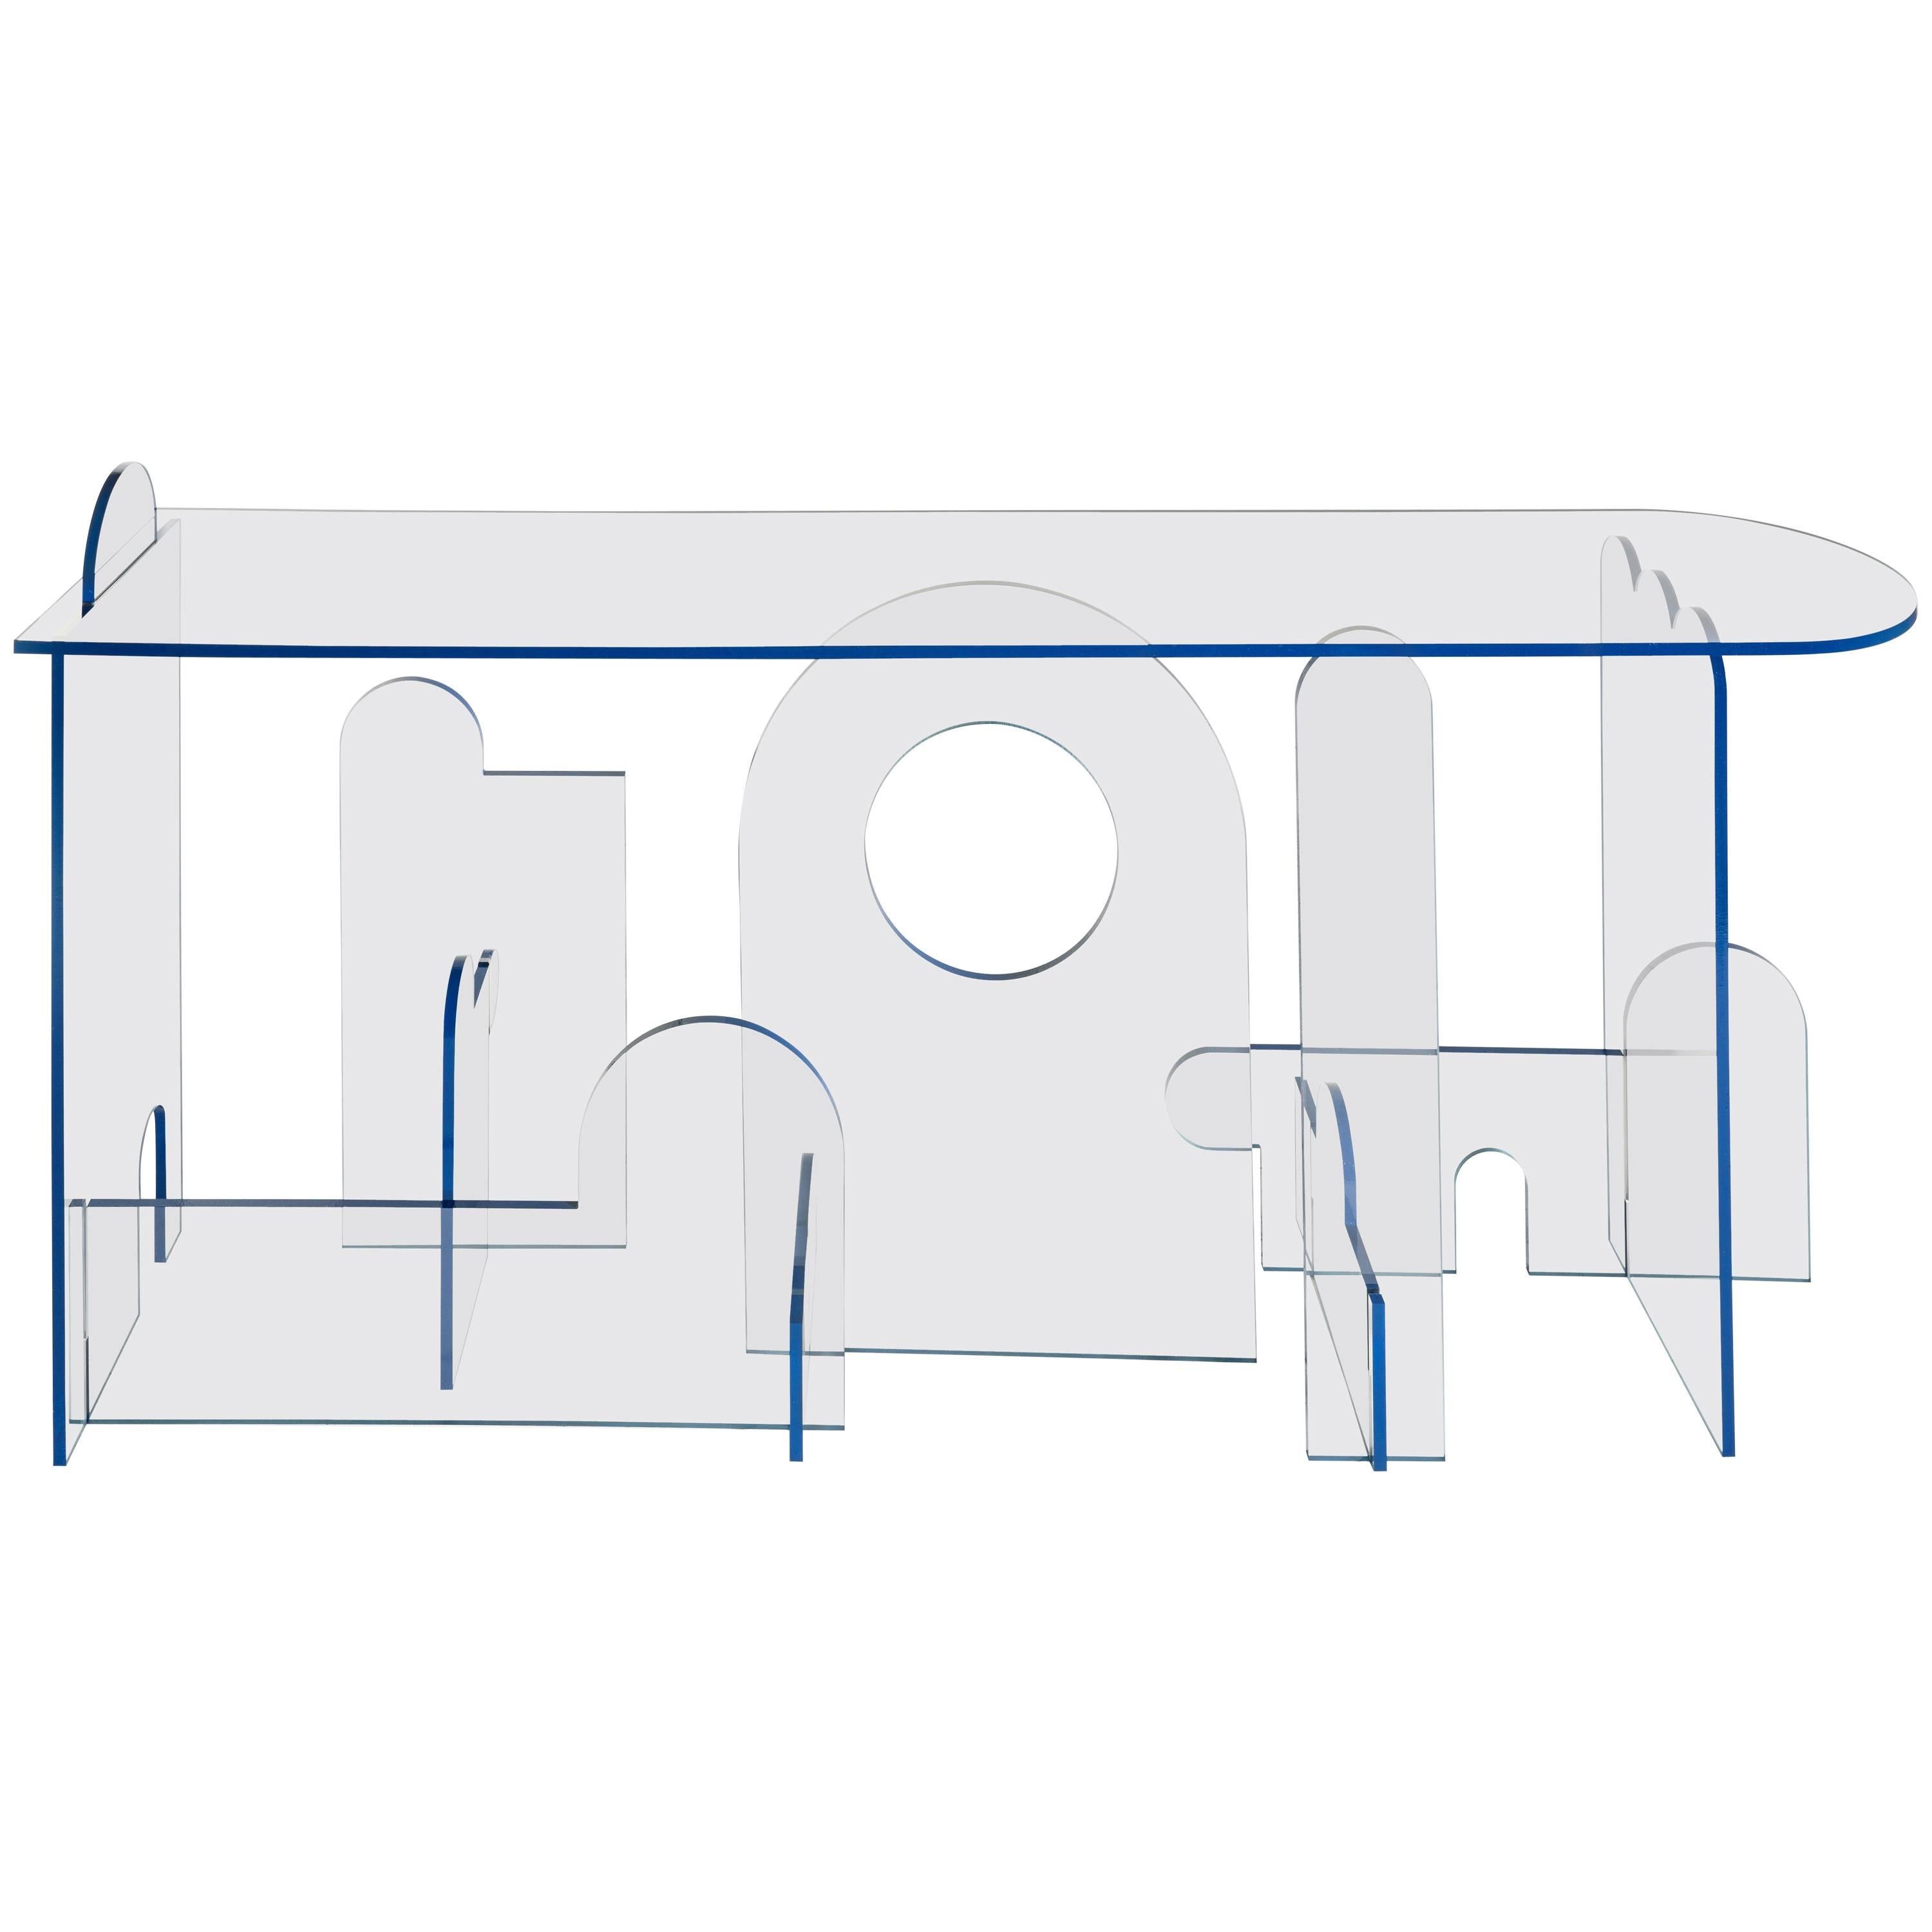 Lexan Series Console Table by Phaedo, Clear Lexan with Blue Oil, Painted Edge For Sale